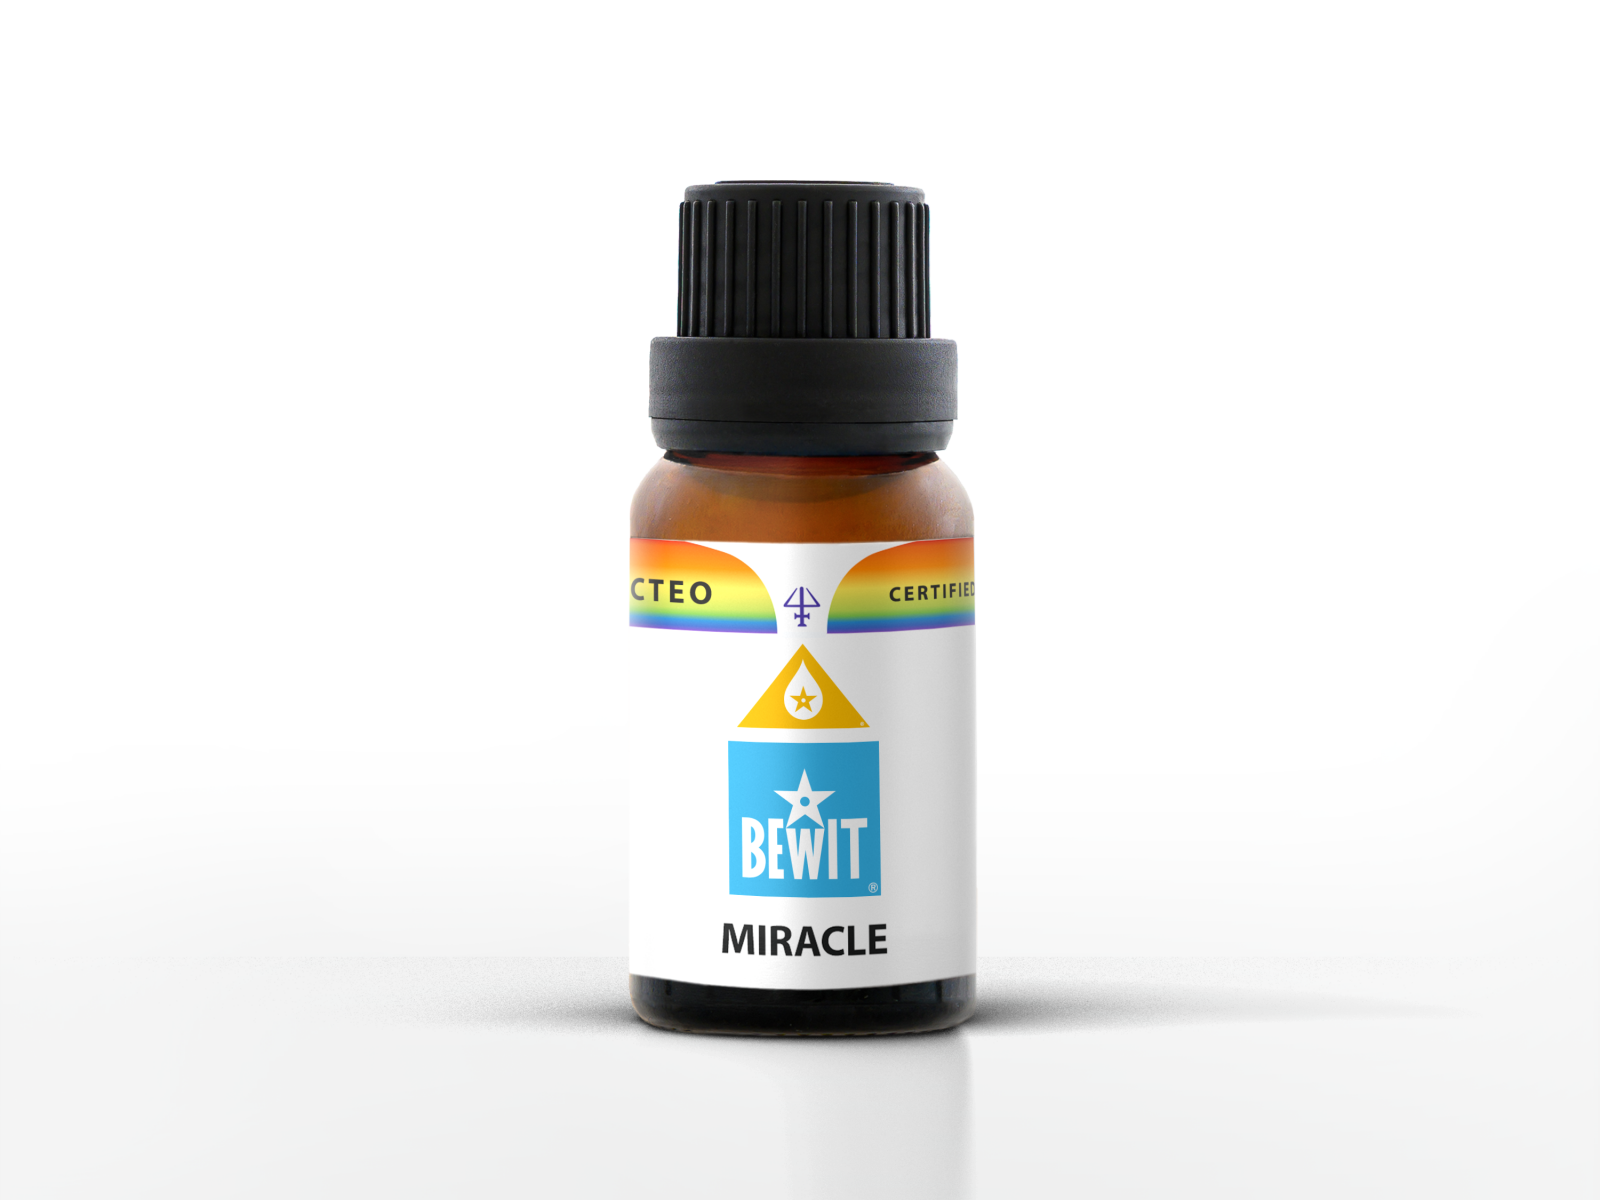 BEWIT MIRACLE - 100% natural essential oil blend in CTEO® quality